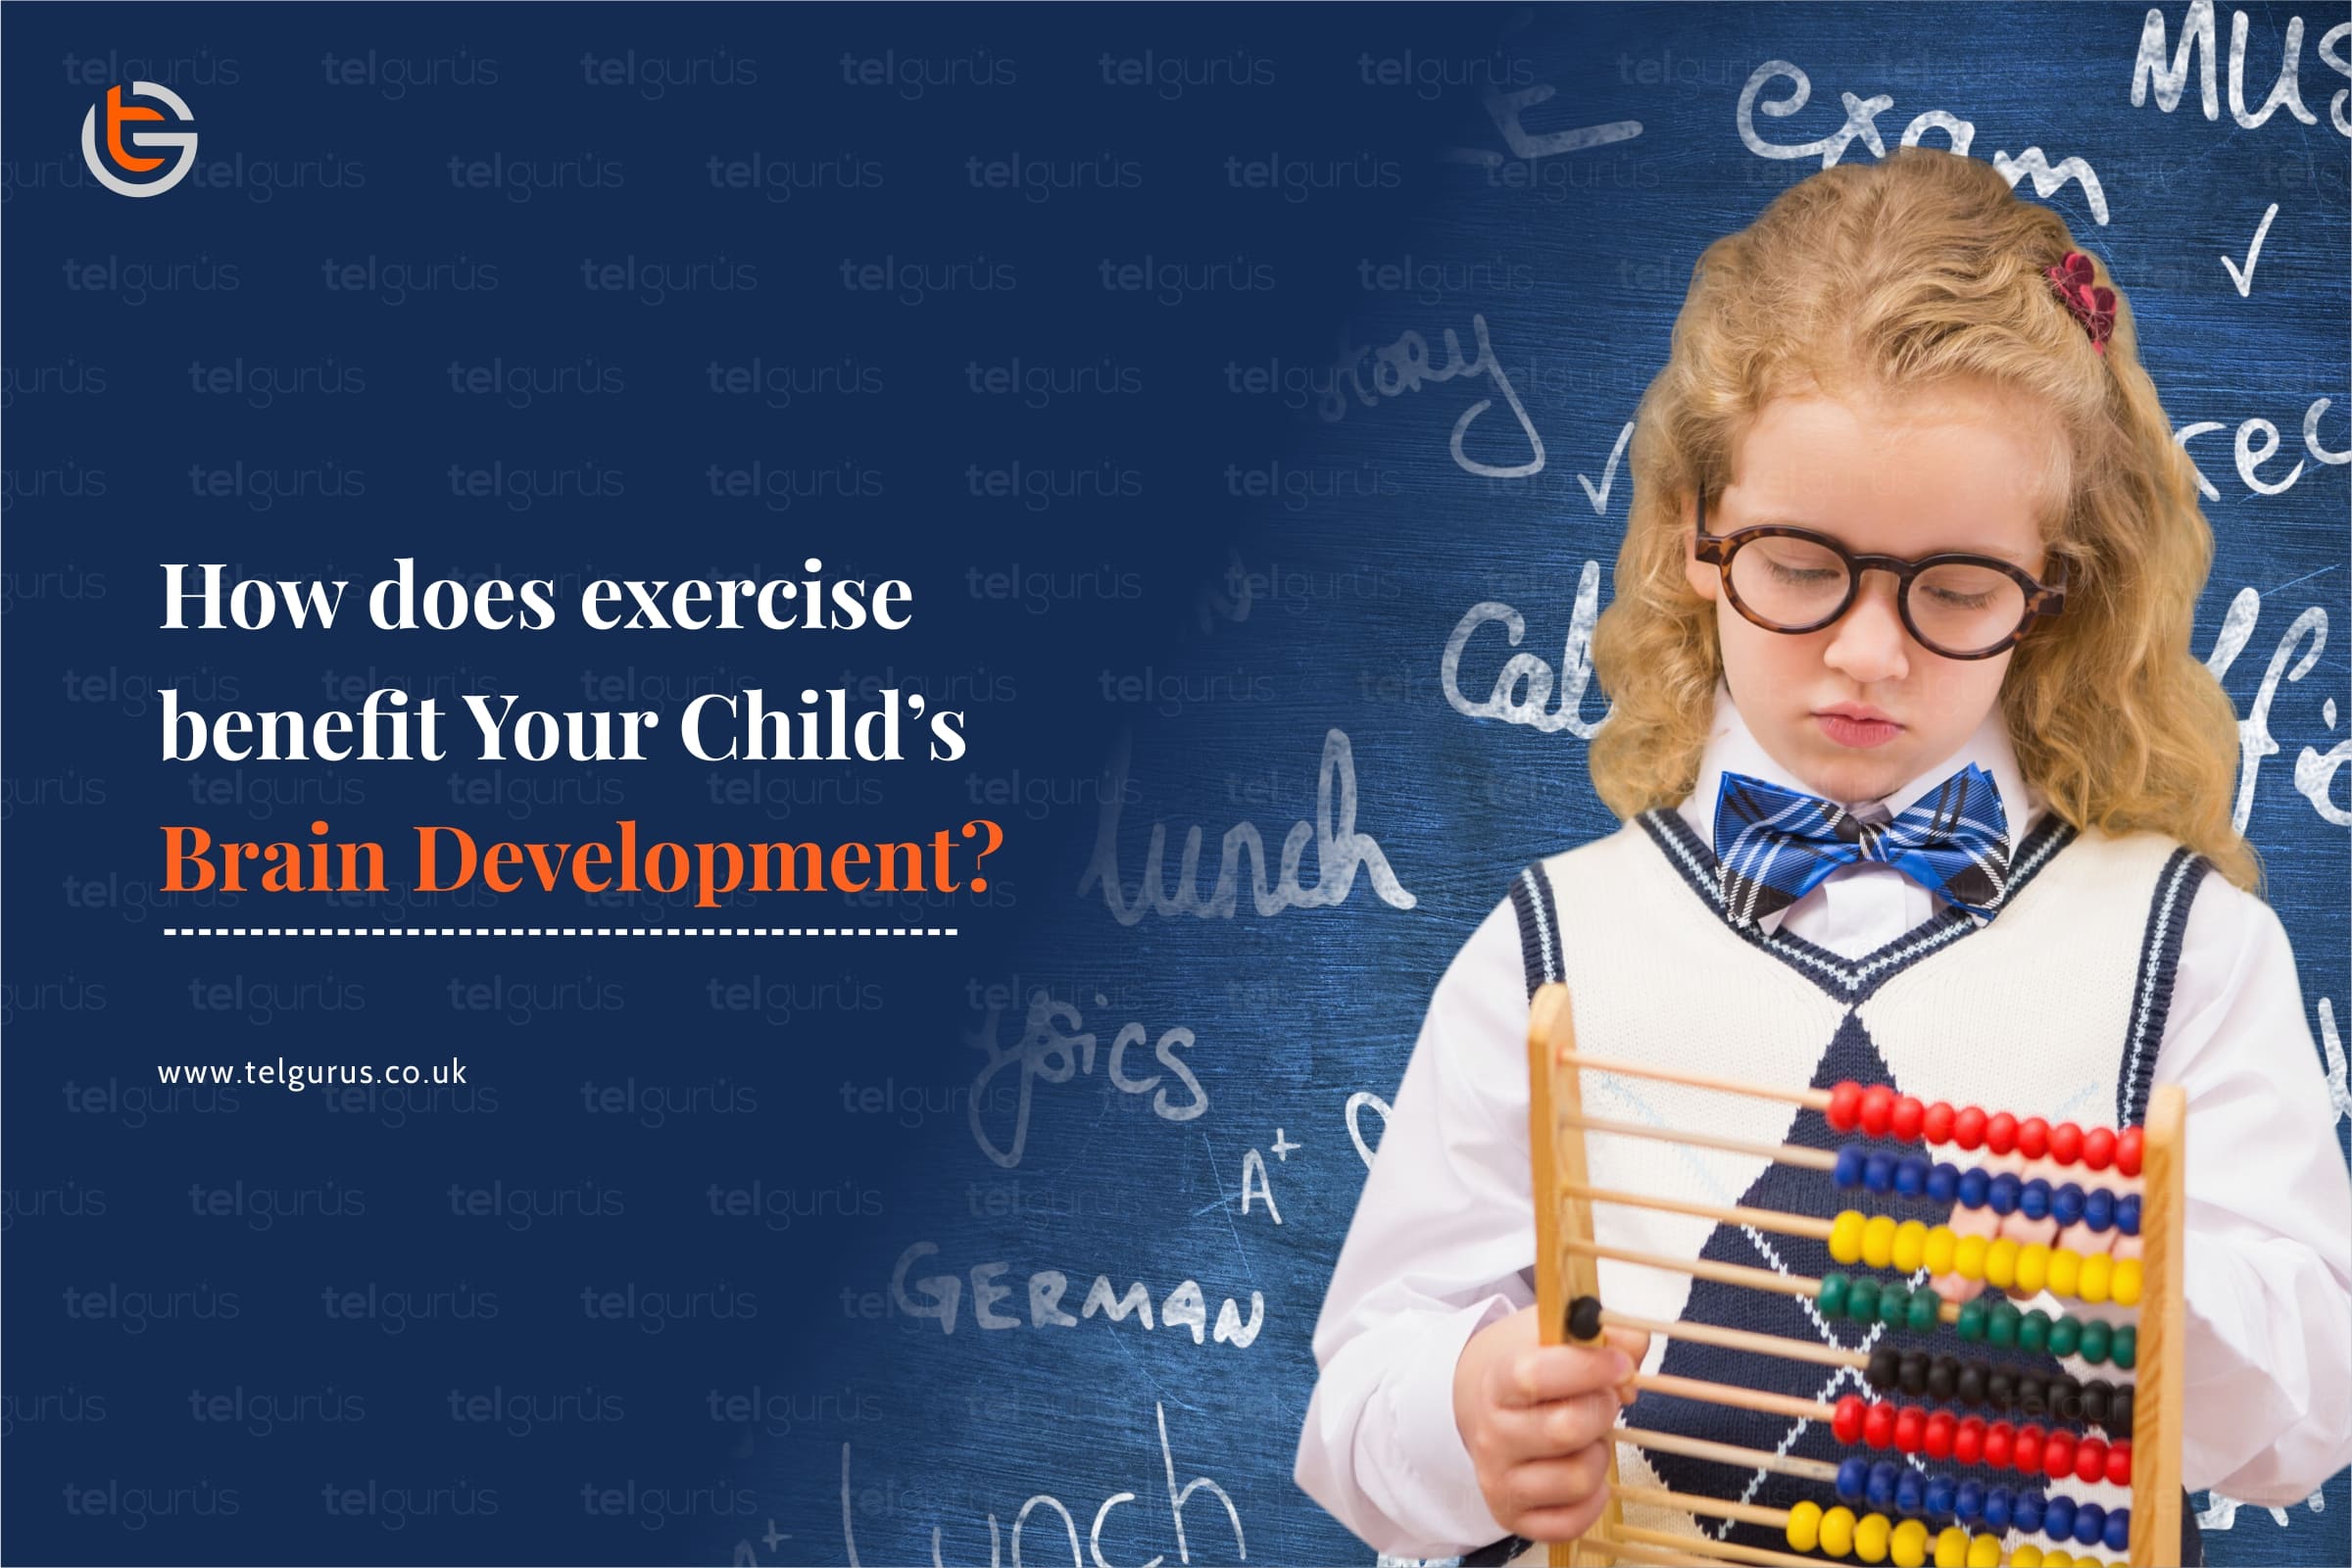 How does exercise benefit Your Child’s Brain Development?